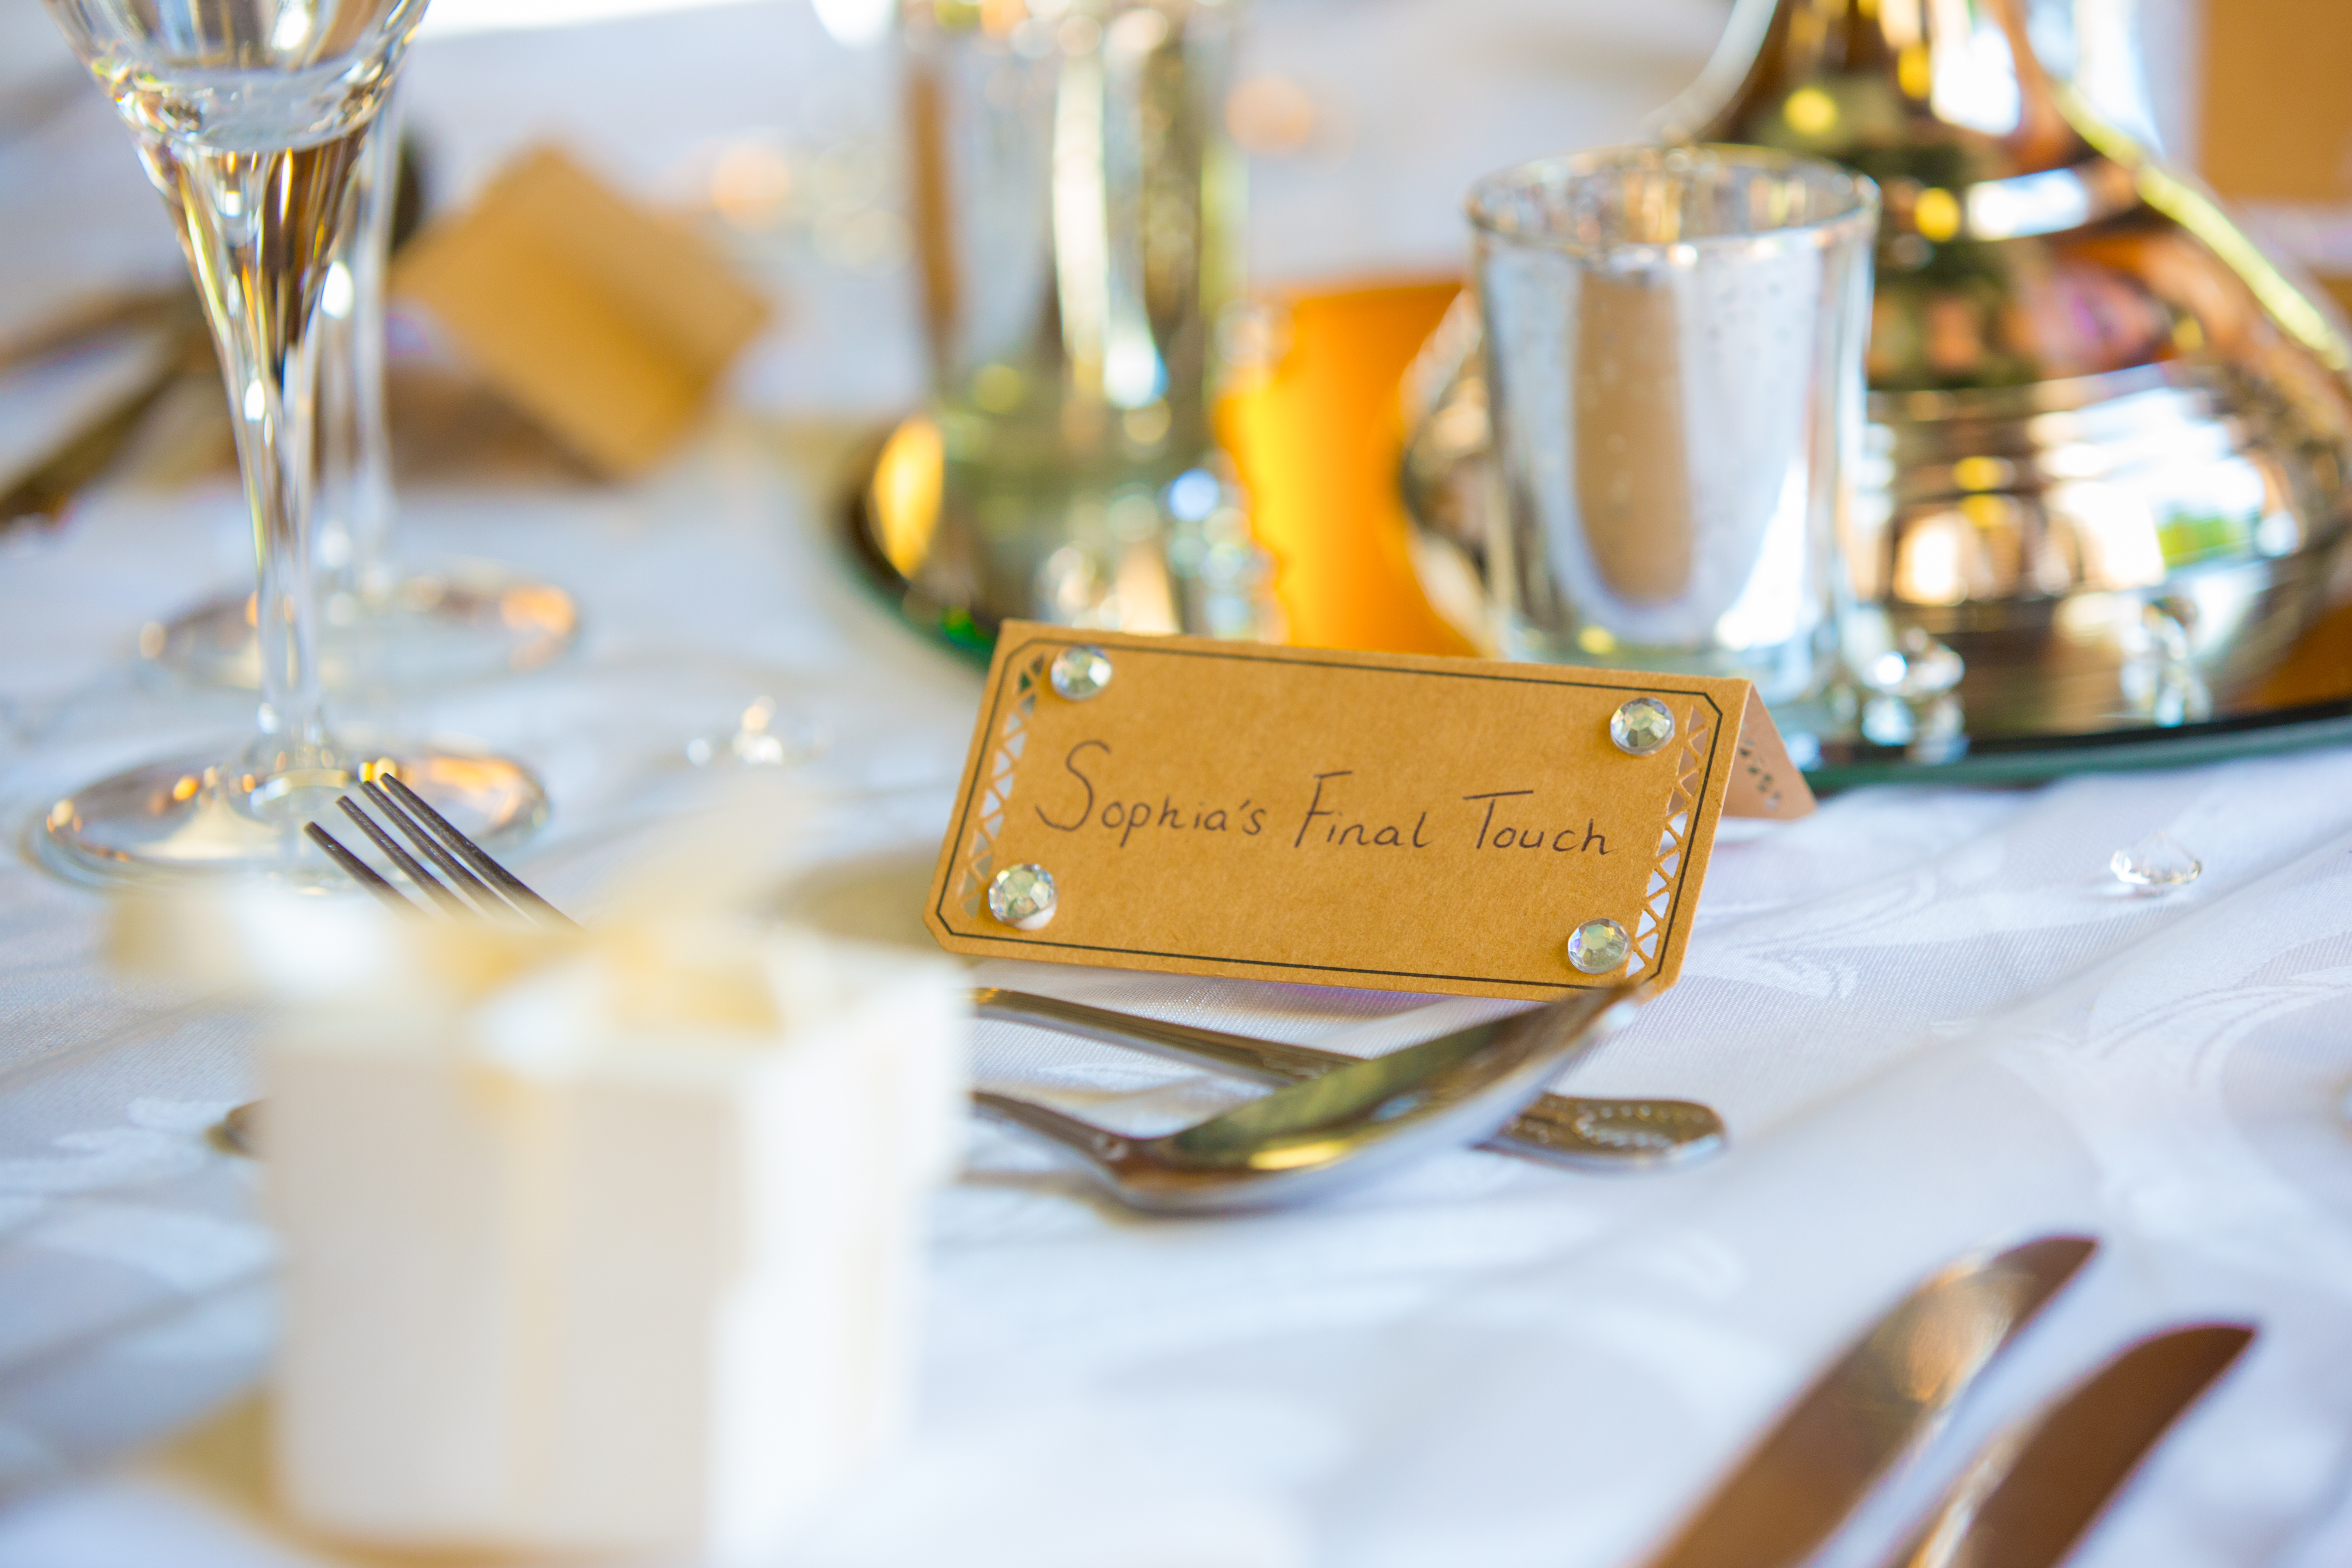 Rustic place cards with Gems - Sophia's Final Touch - Venue Styling - Weddings & Event Decoration